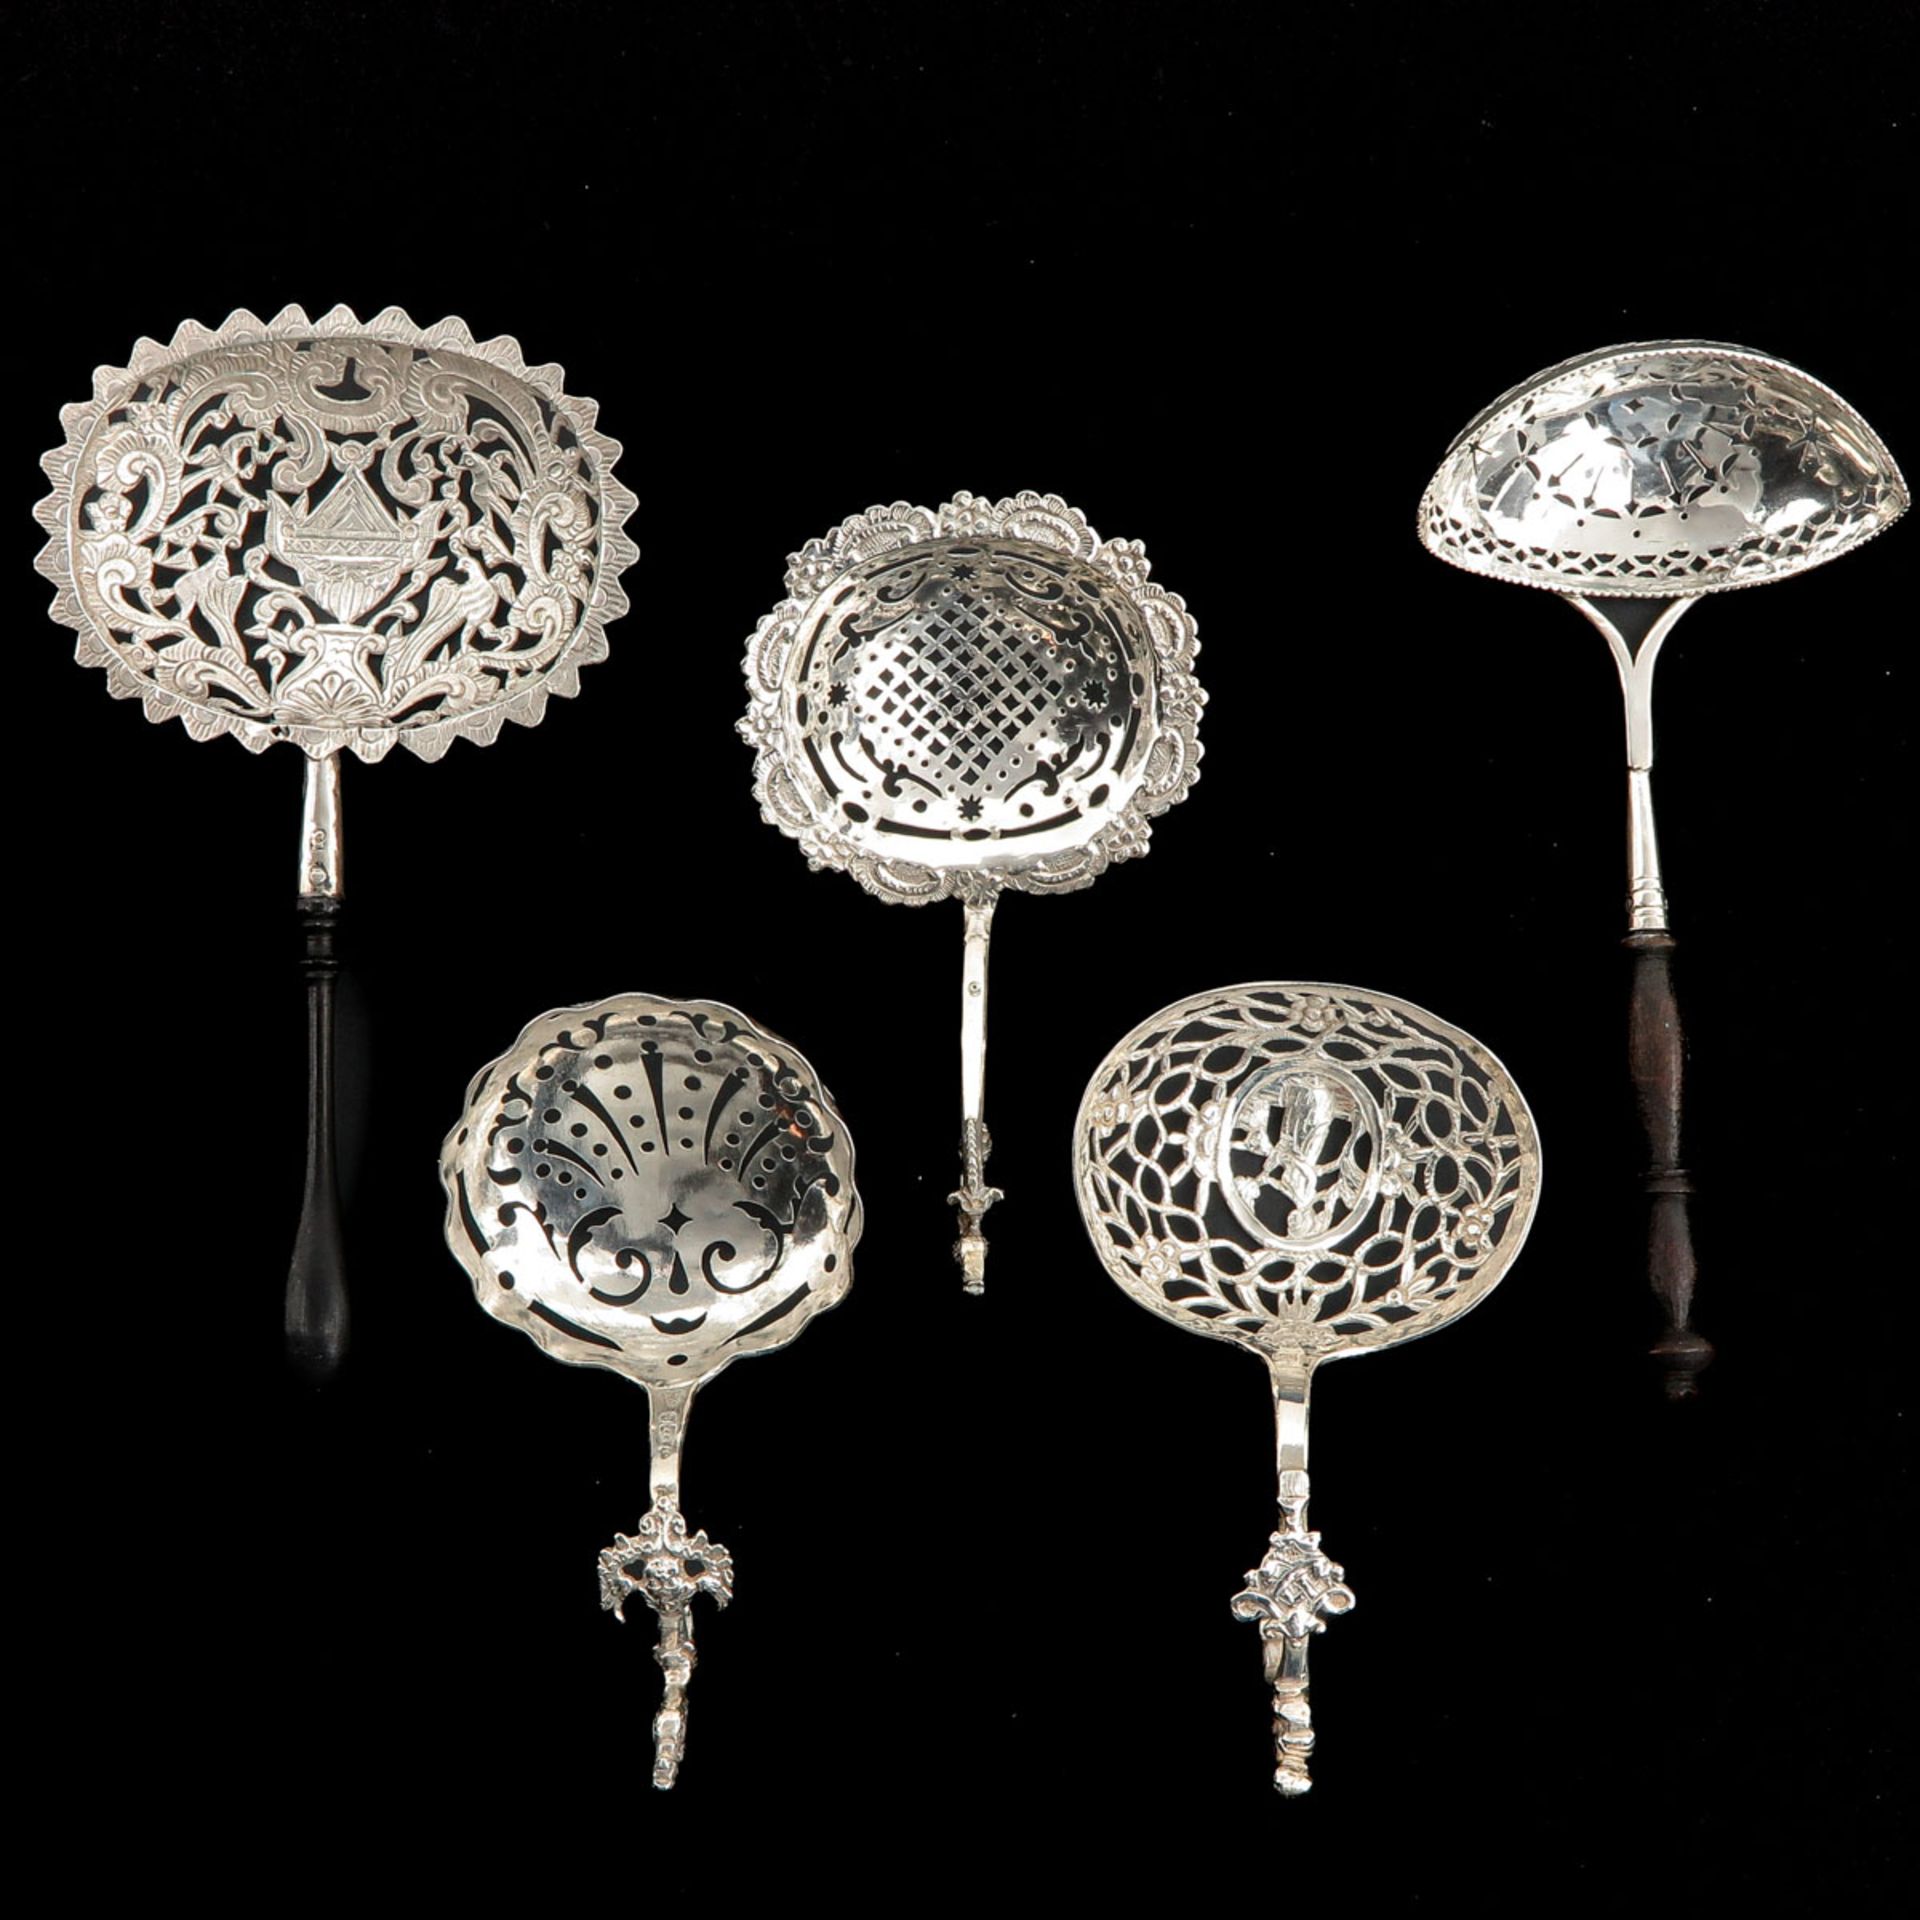 A Collection of 5 Silver Spreaders